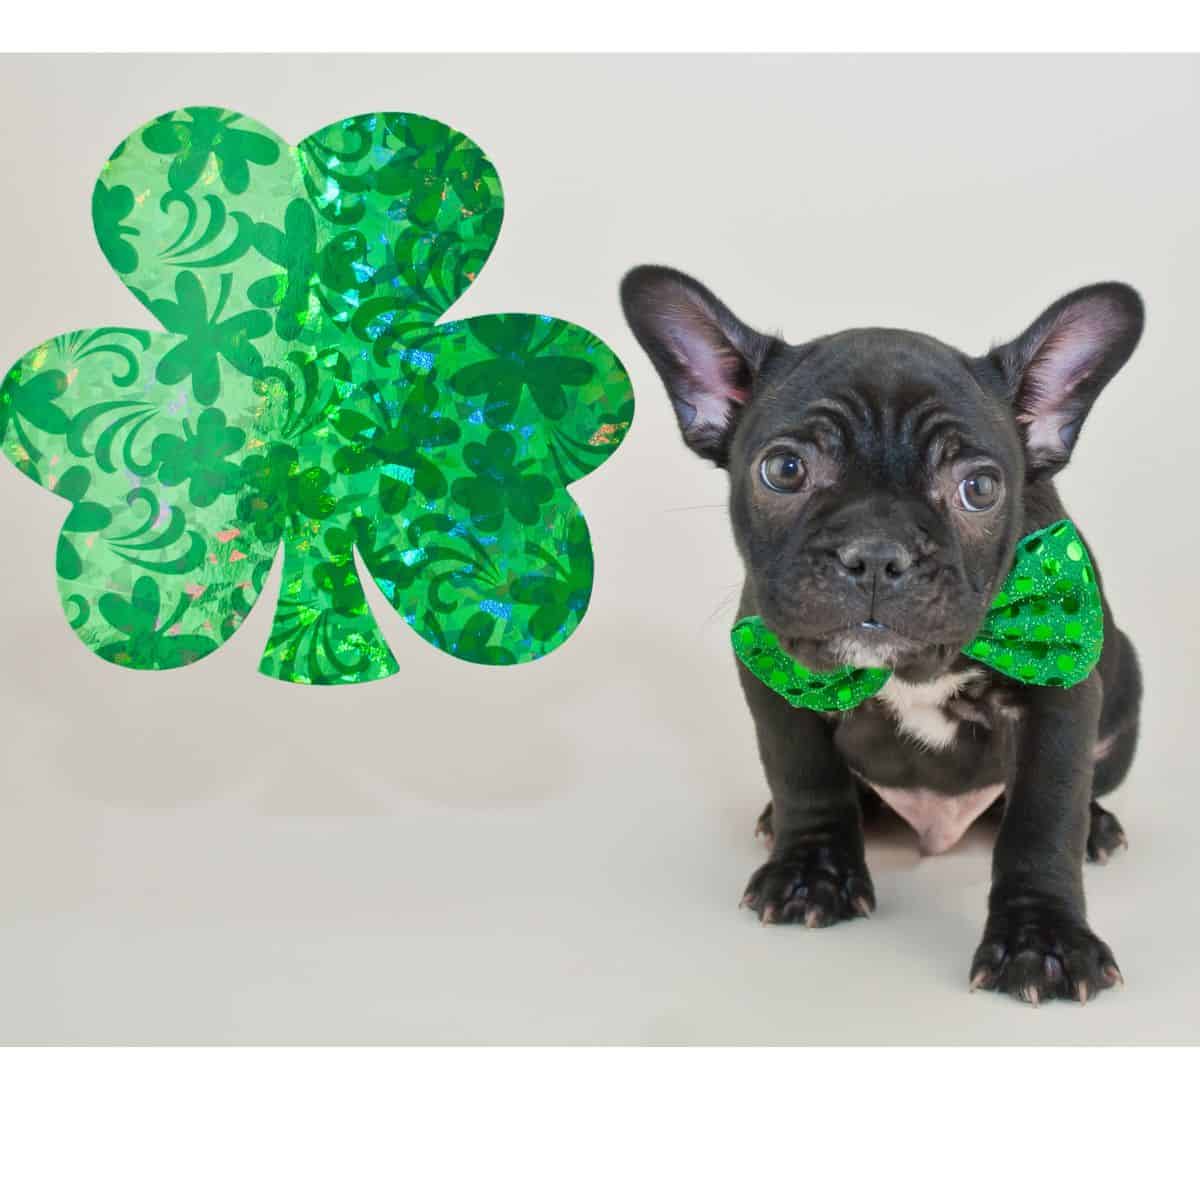 Small black bulldog in green wear next to a green shamrock ready to celebrate St. Patrick's day